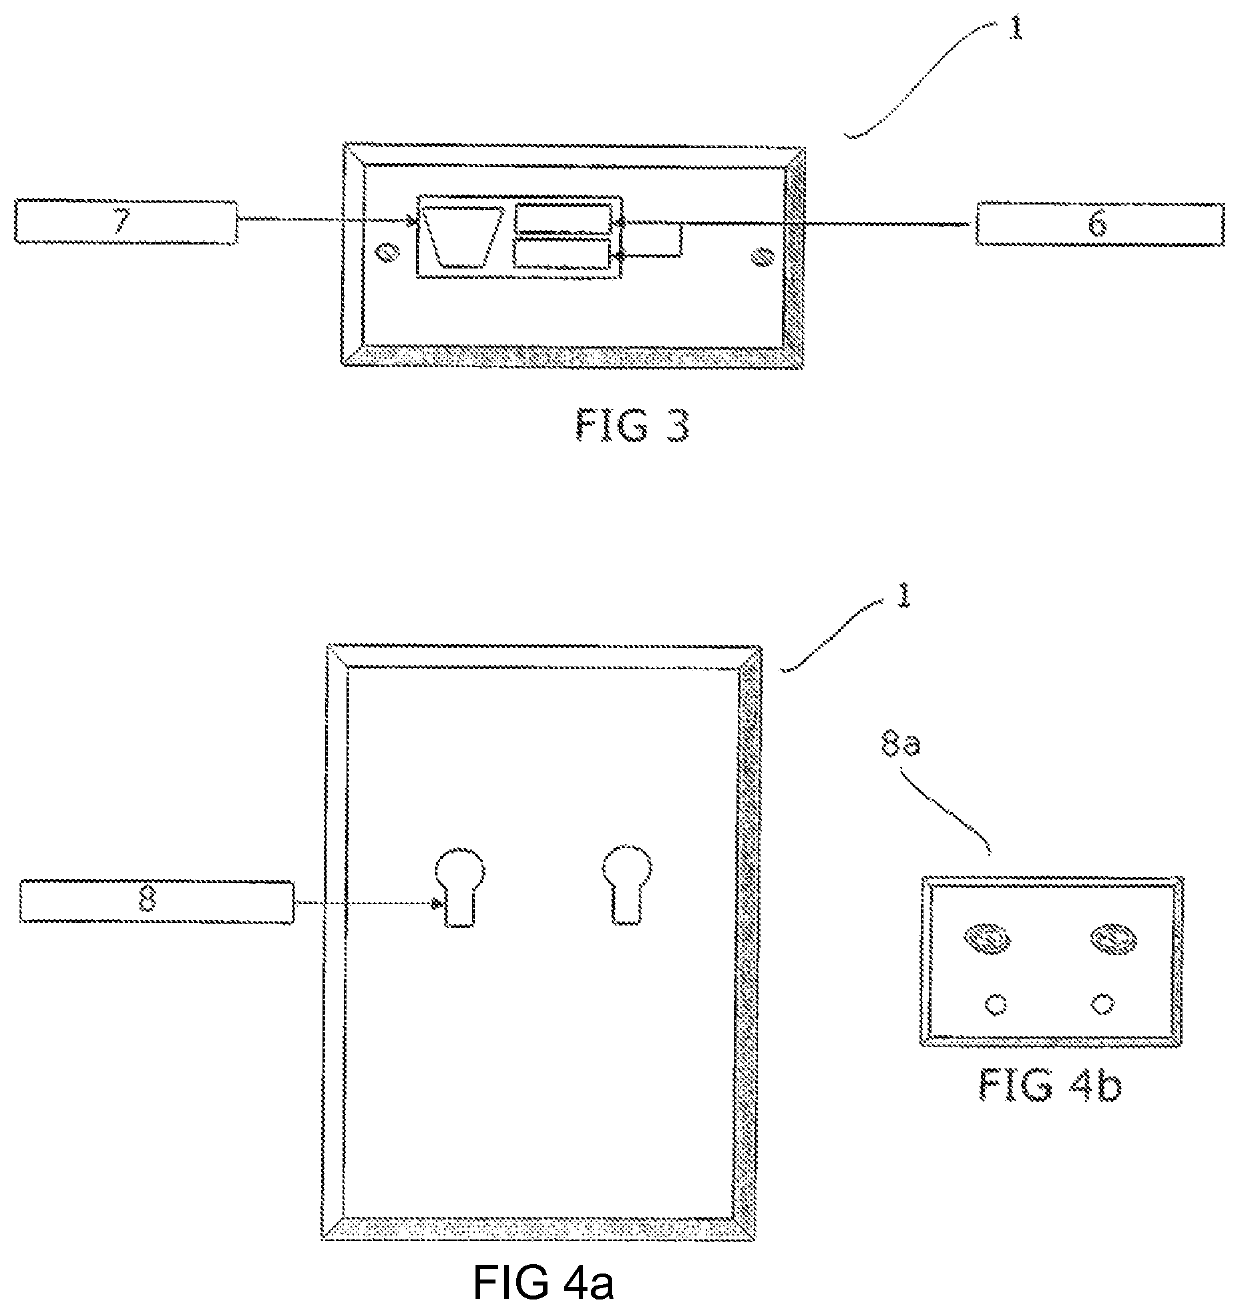 Apparatus for automated monitoring of facial images and a process therefor